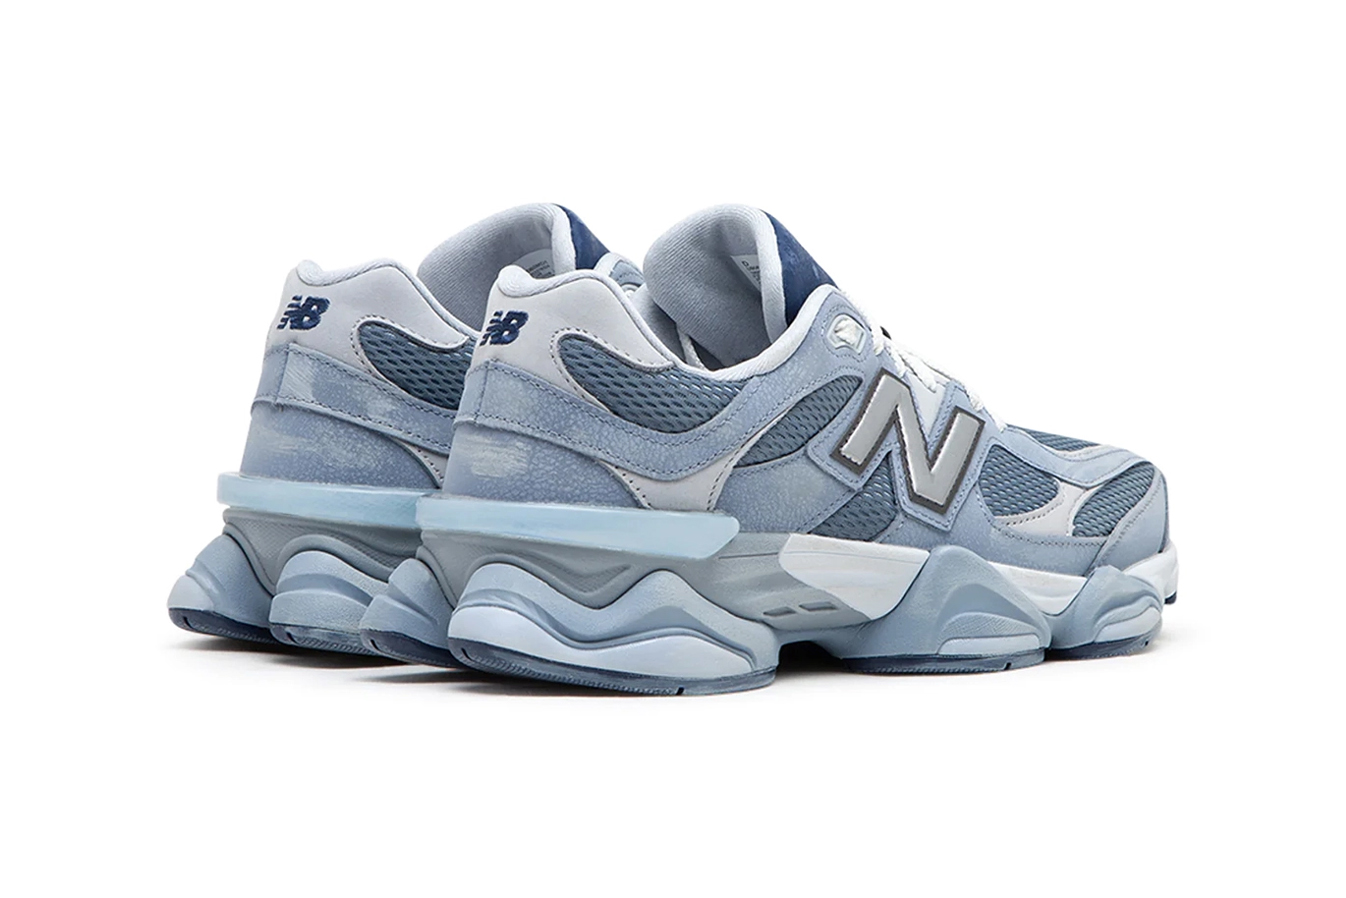 New Balance 9060 Cool Artic Grey suede mesh release info date price